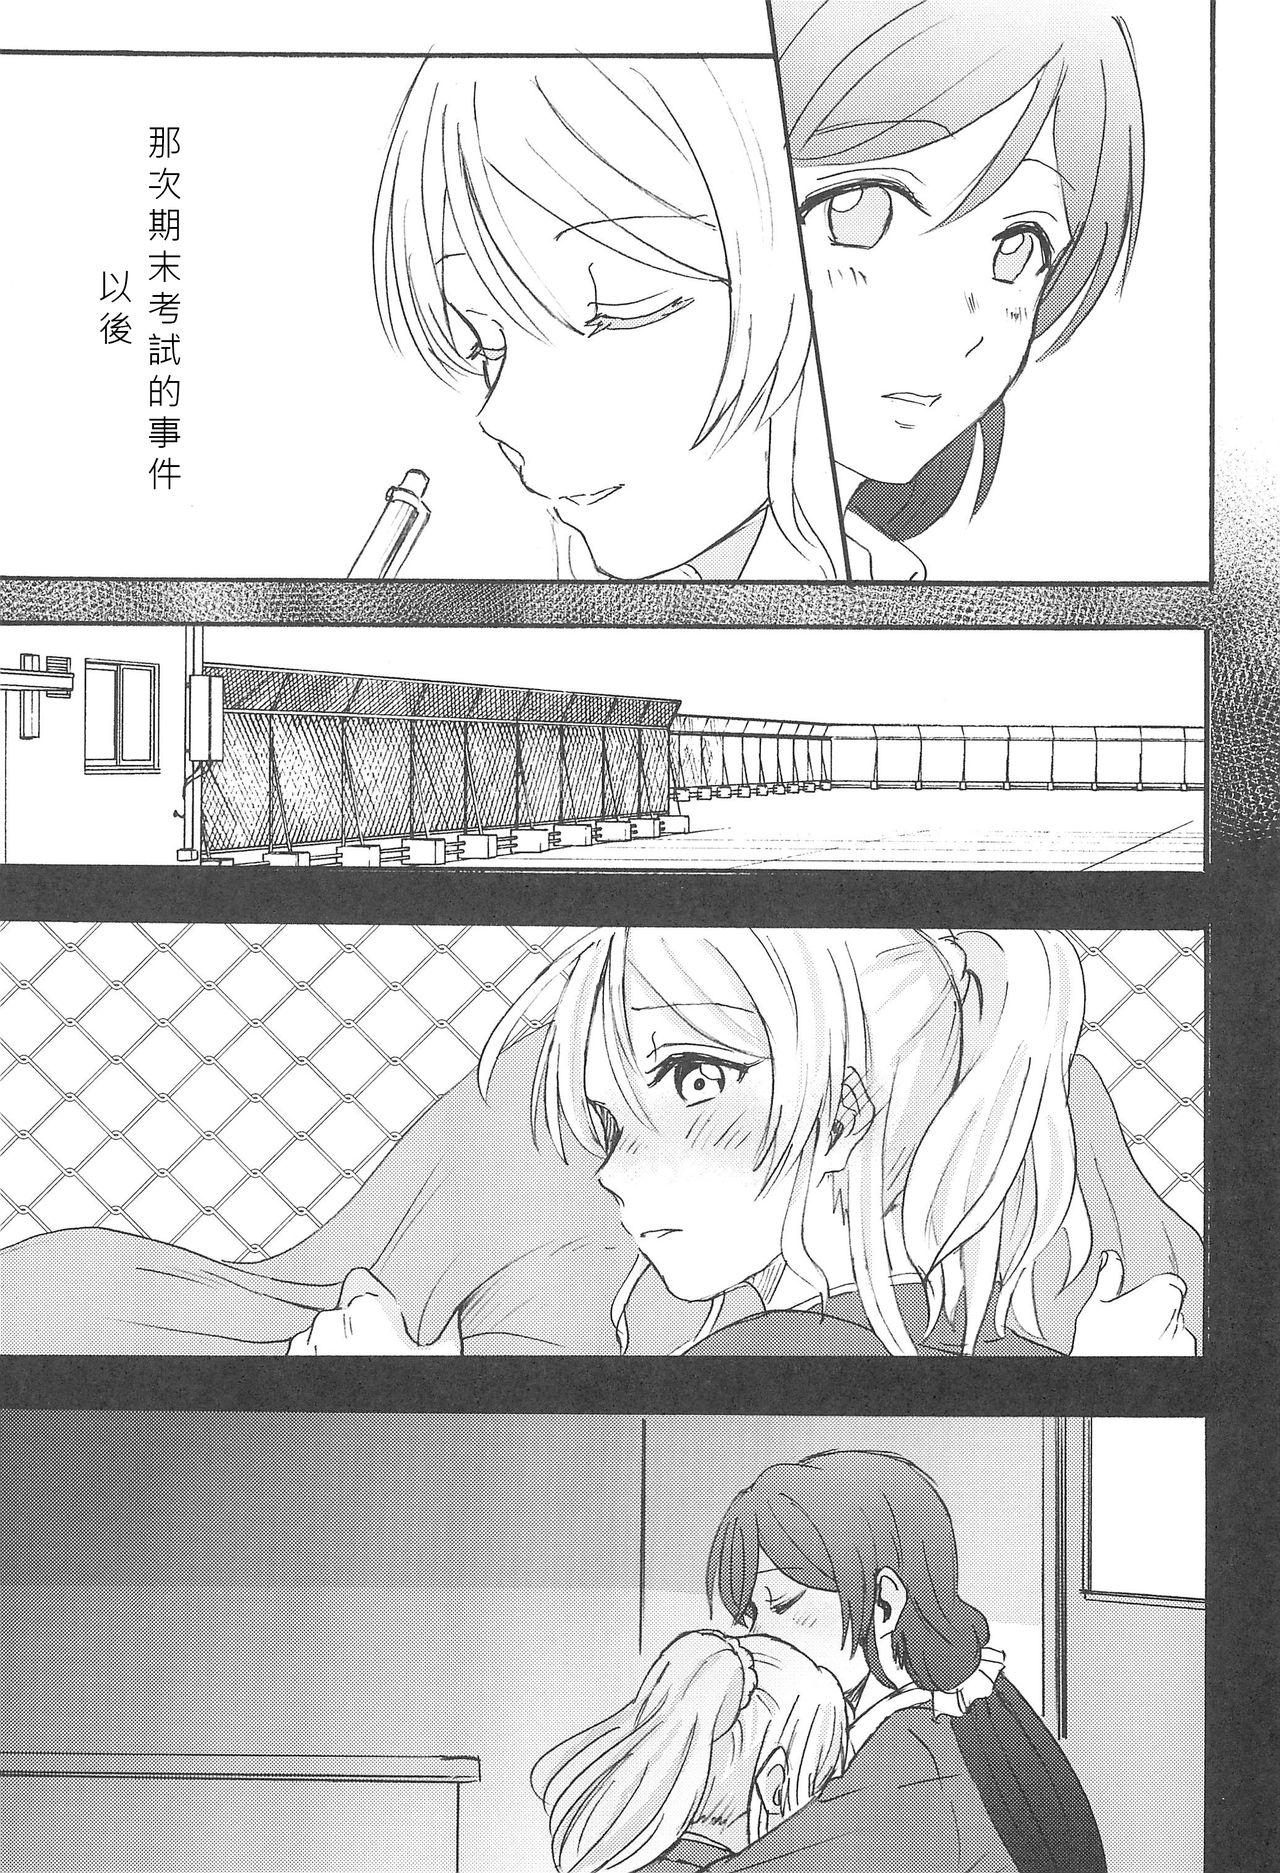 Hot Couple Sex Unbalance Emotional Heart - Love live Family Sex - Page 6